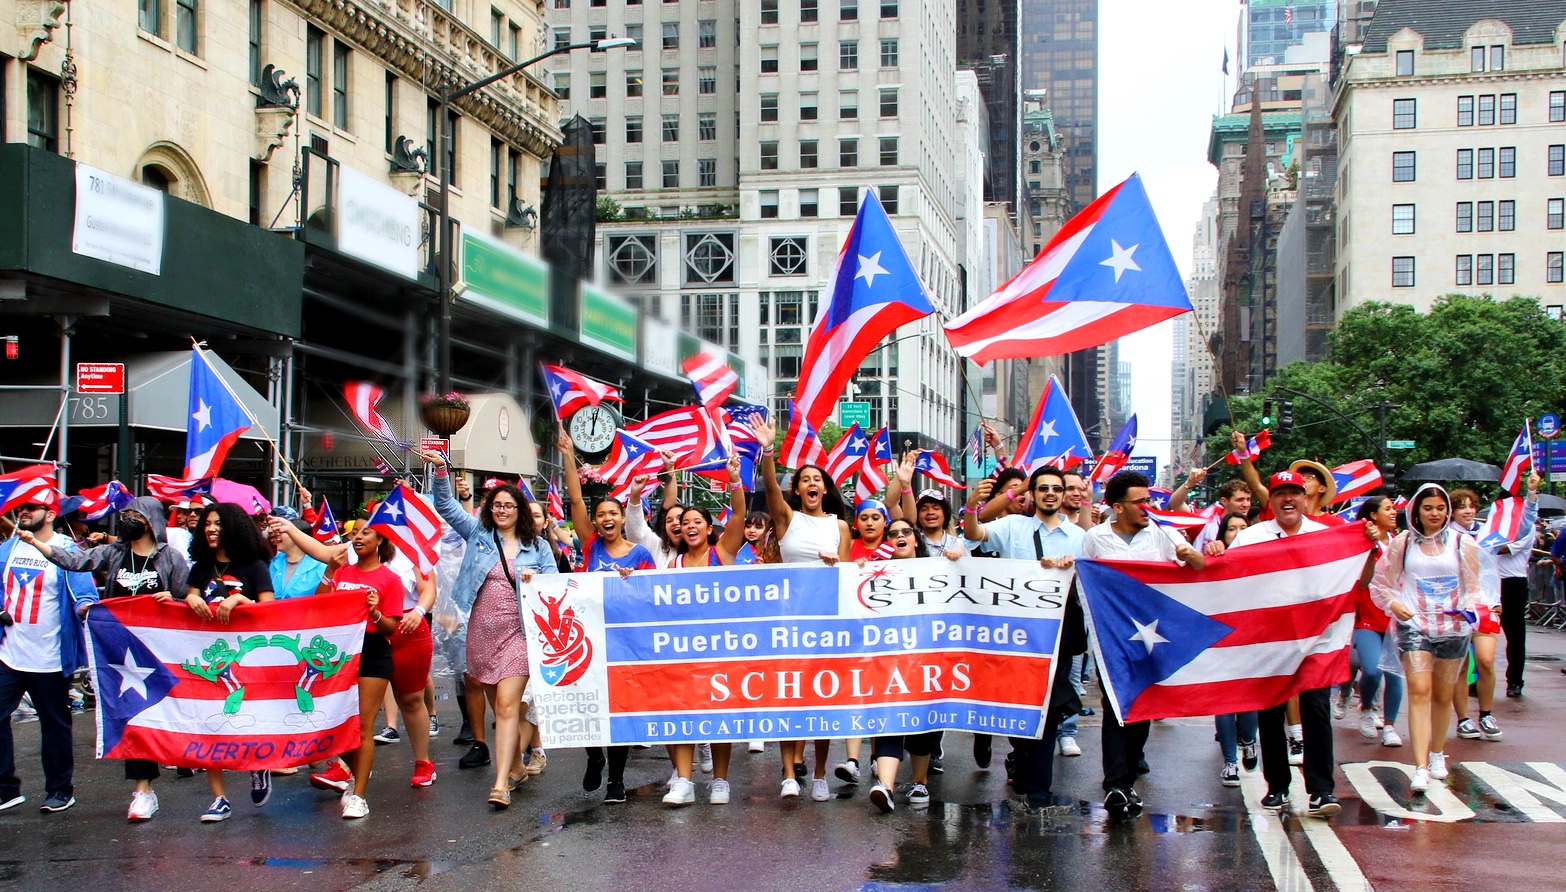 National Puerto Rican Day Parade Launches 2023 Scholarship Program